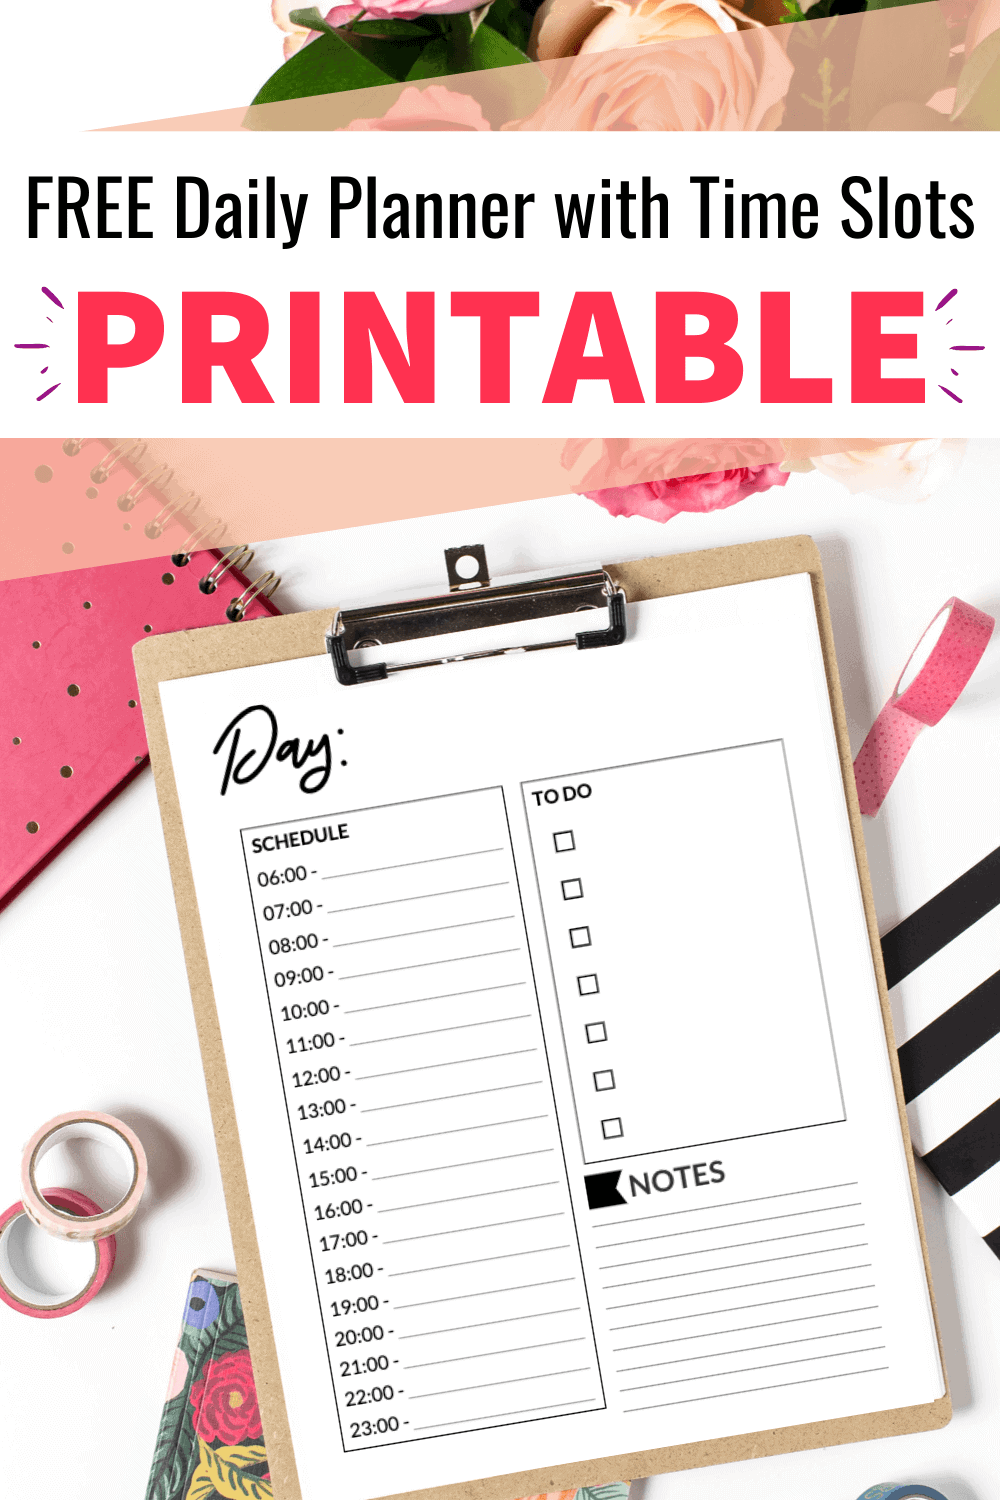 Stuck at home and ready to get organized and ace your time management? Then you need this simple and cute daily planner template. Daily planner printables + free templates = time management win! So grab your daily planner printables free PDF and get alll the things done. This is the best daily planner printables free hourly and will be a winner for your productivity. Grab your daily schedule printable free time management now! #planner #timemanagement #freeprintables #getorganized